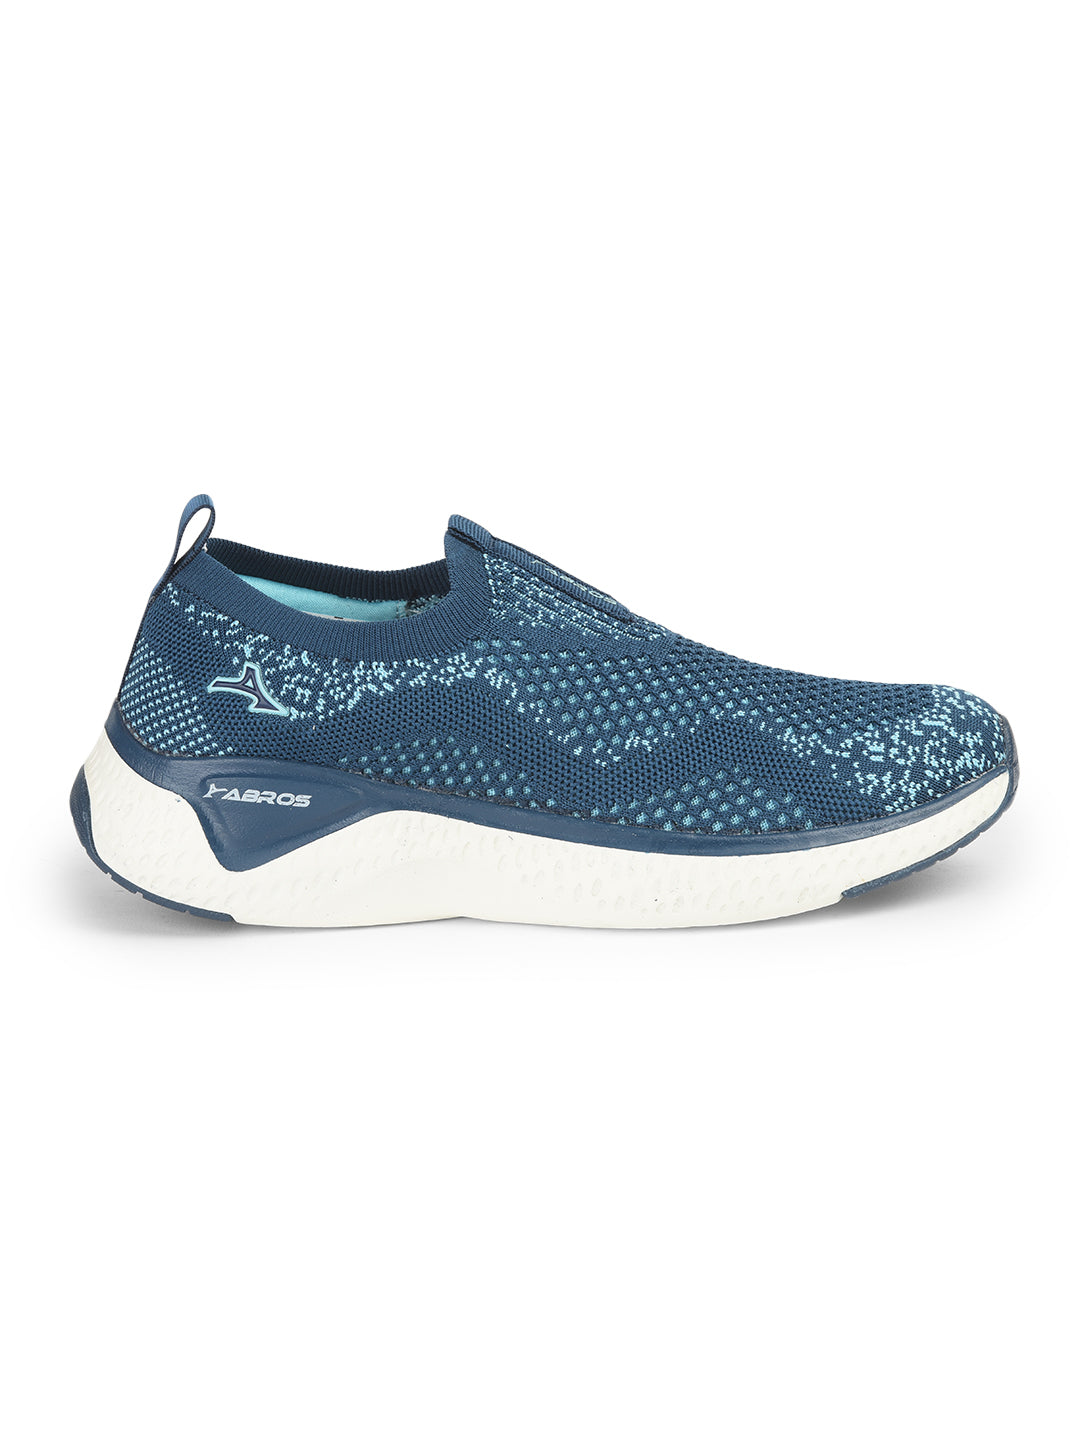 ABROS PEARL-N SPORTS SHOES FOR WOMEN